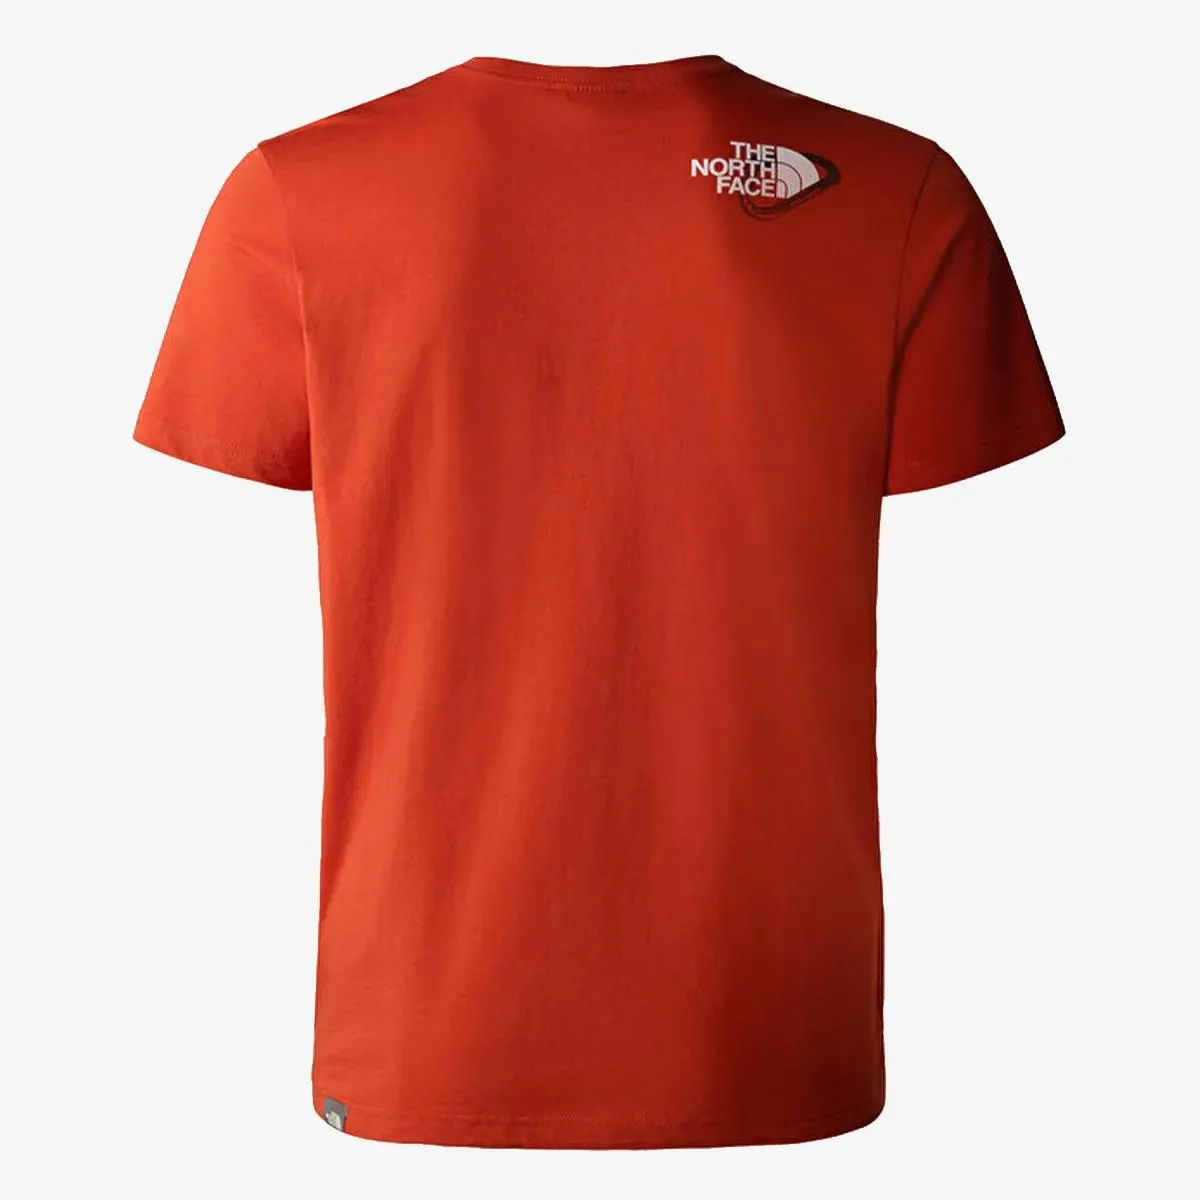 The North Face T-shirt Men’s Outdoor S/S Graphic Tee 